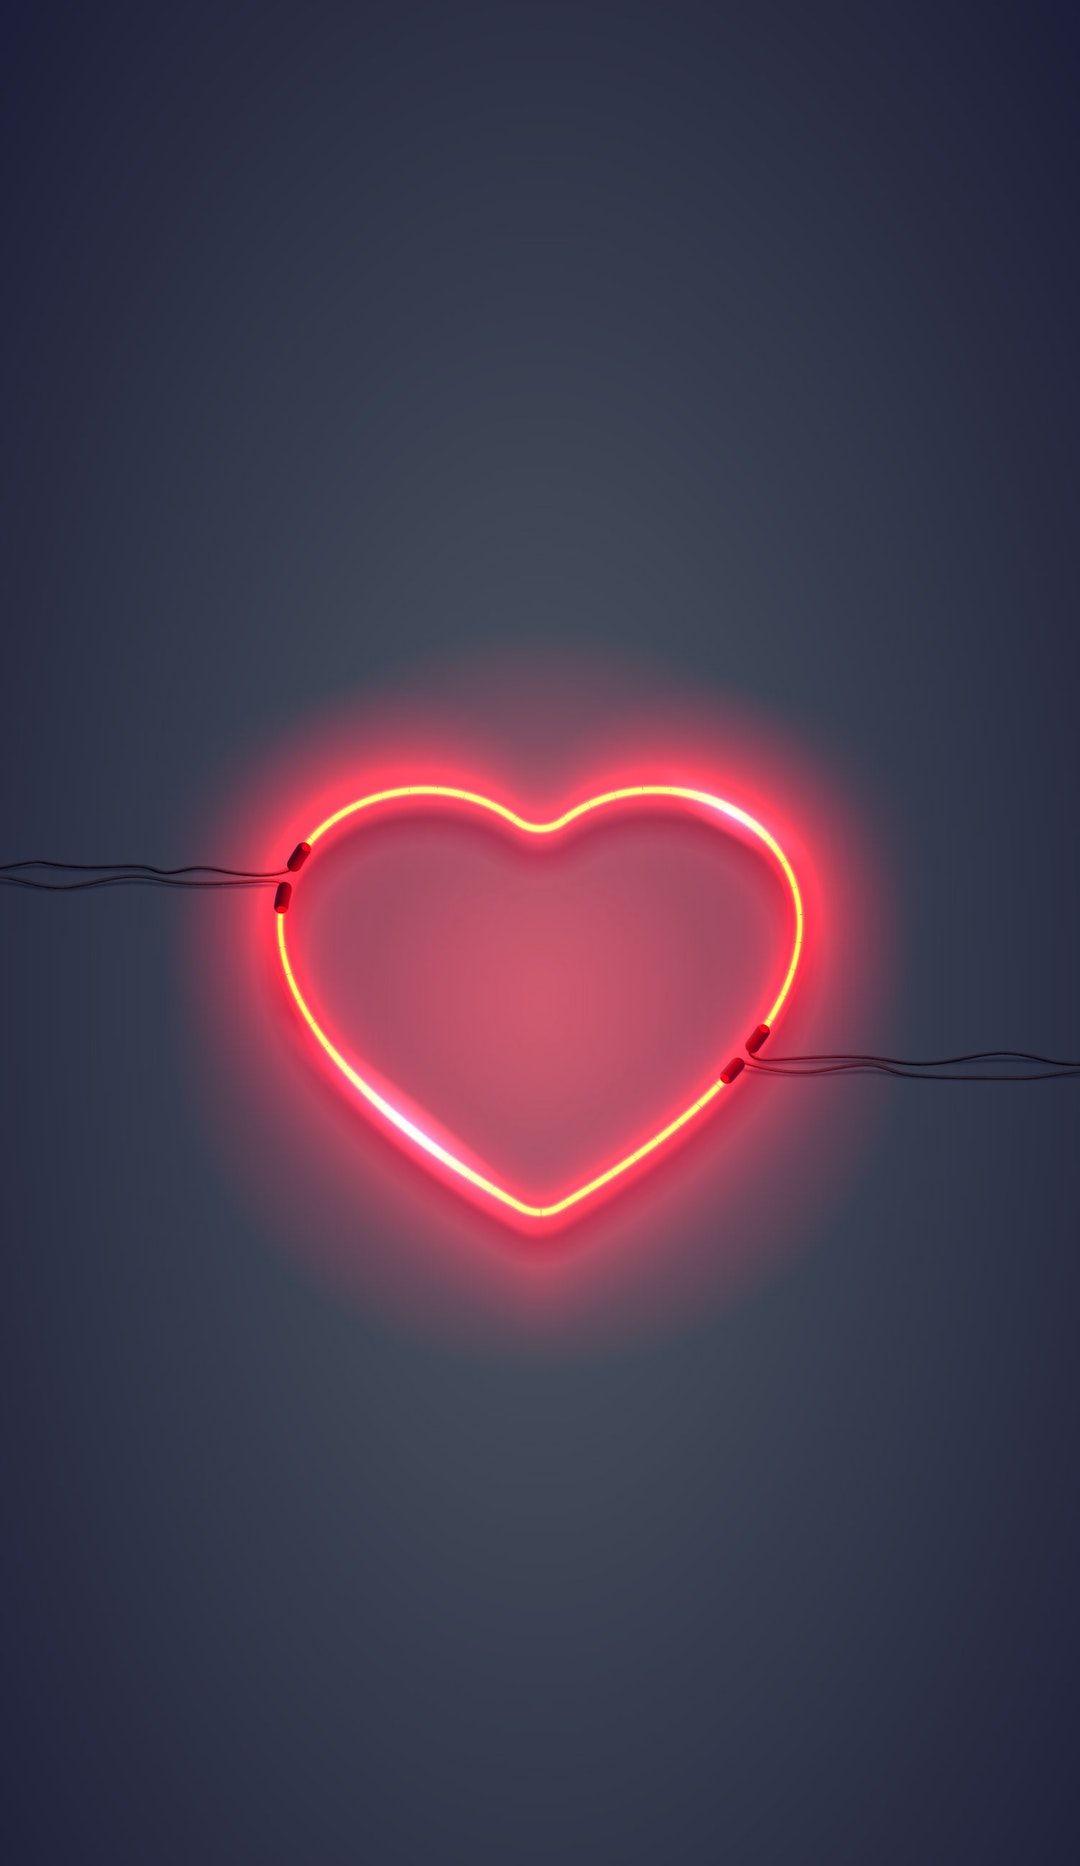 Download this free HD photo of heart, light, neon and red